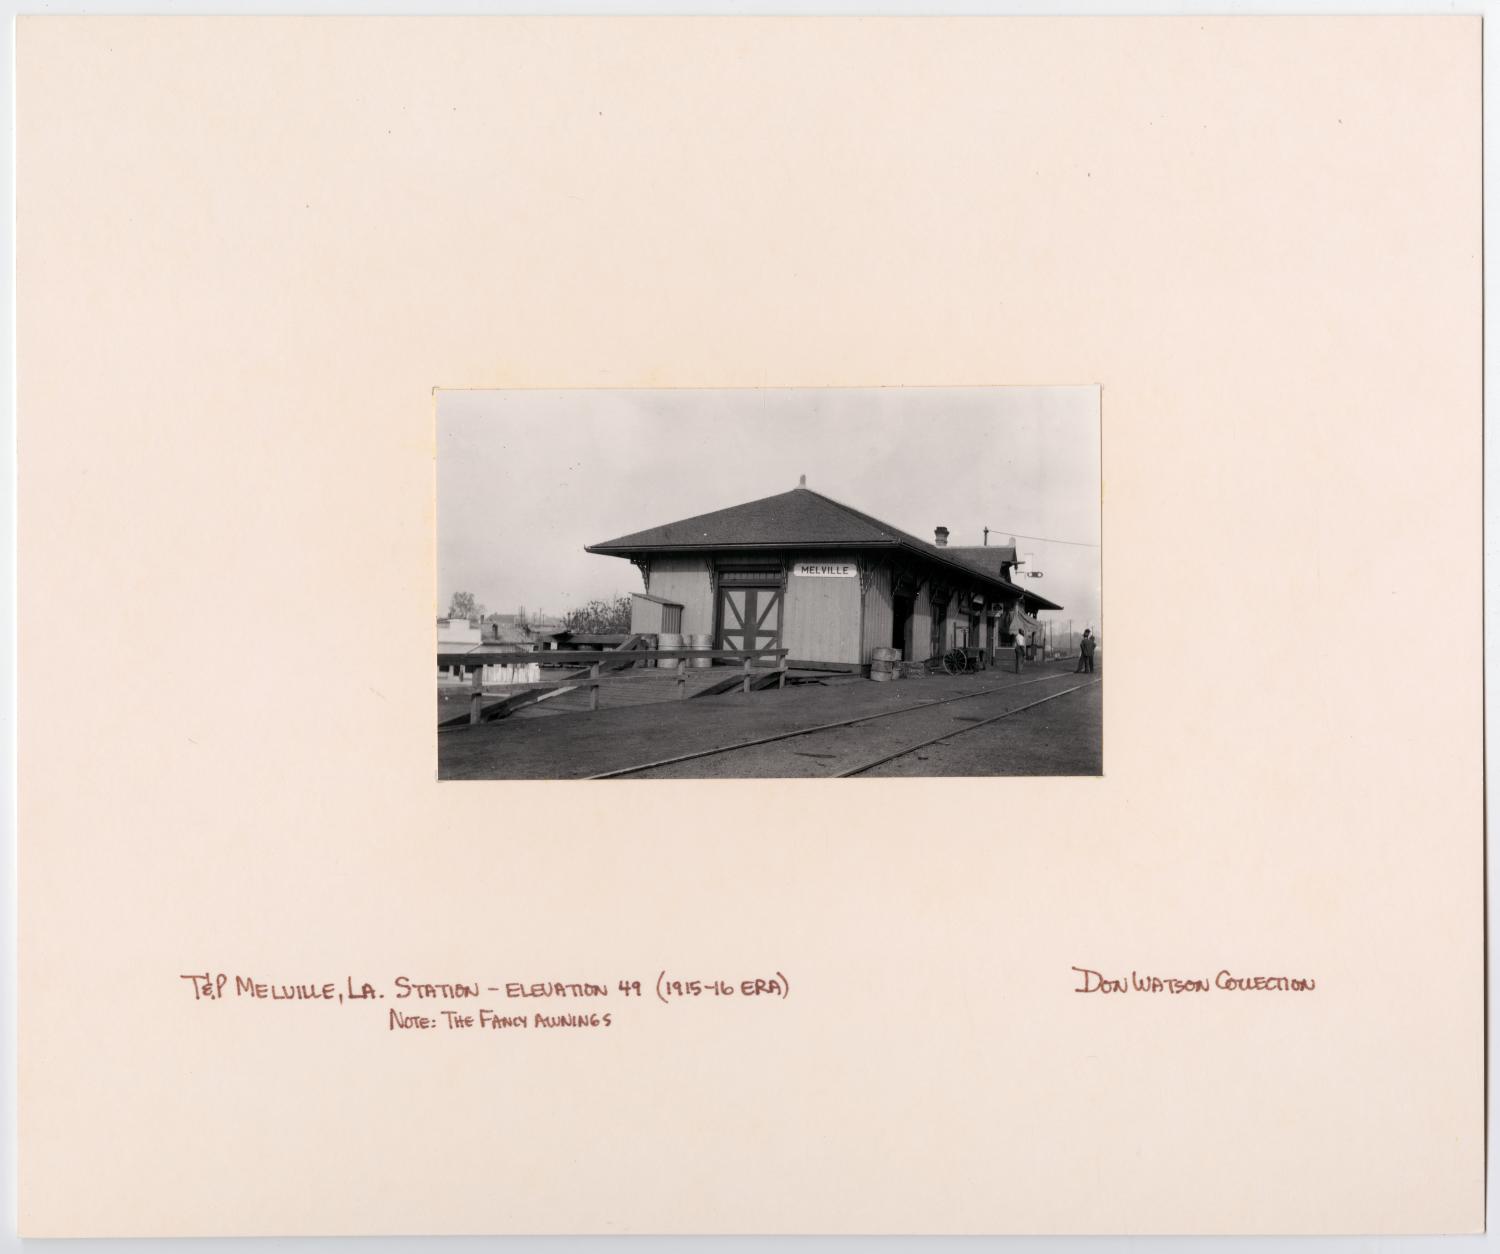 Images of Texas & Pacific Stations and Structures in Melville, LA